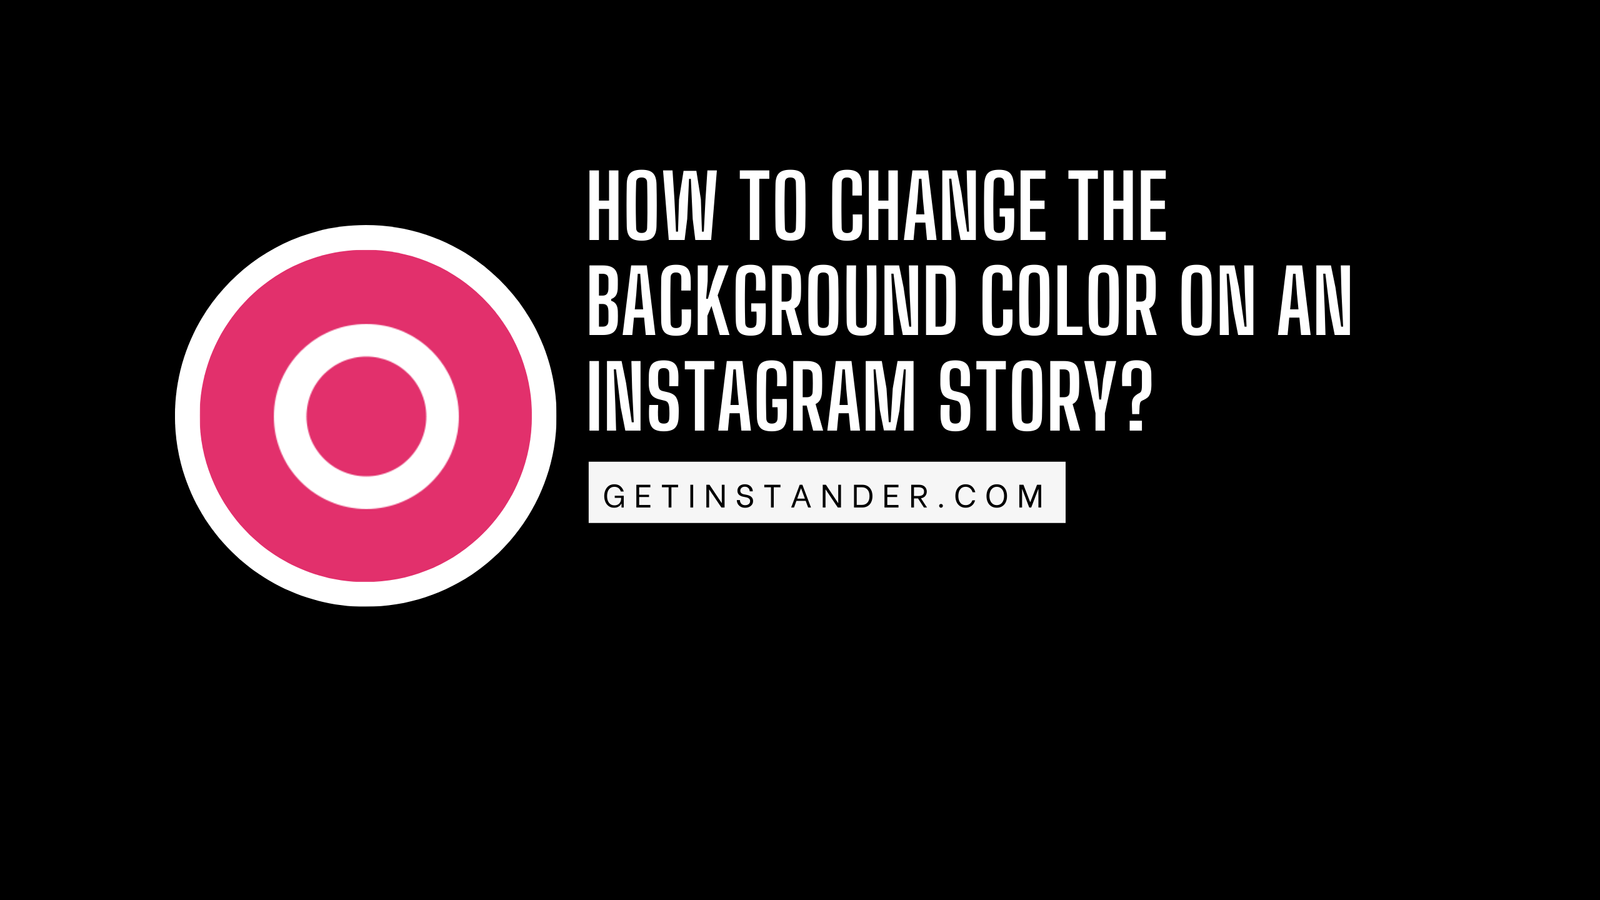 How To Change the Background Color on an Instagram Story?